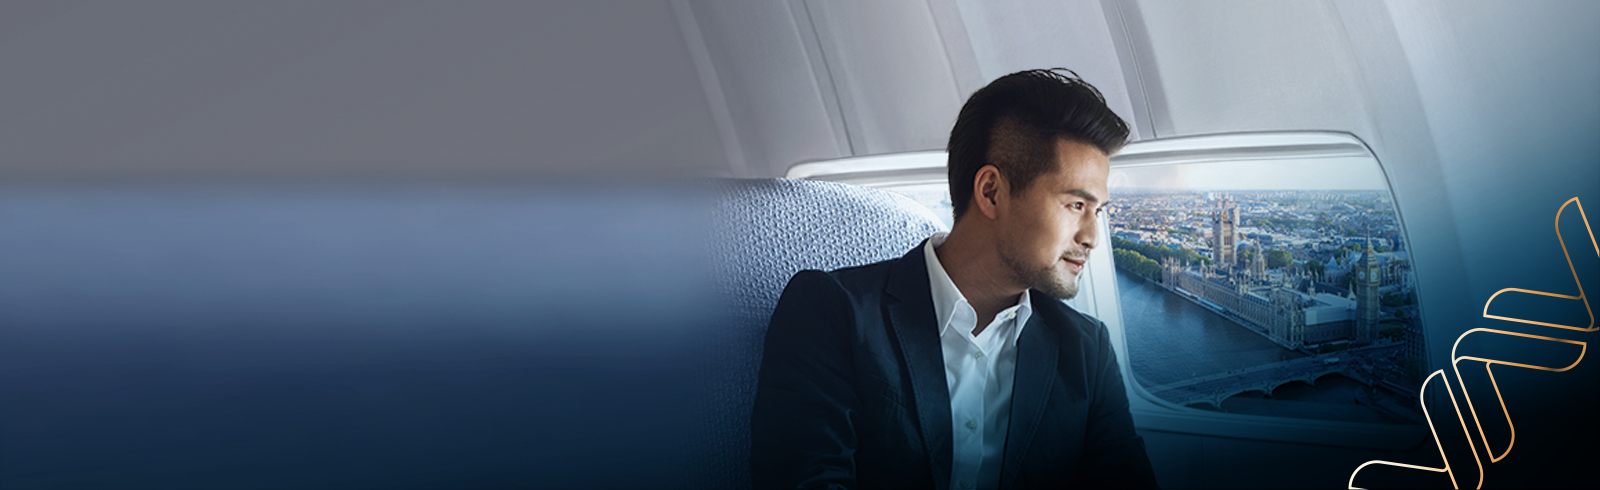 Your front row view of the world, compliments of Standard Chartered Priority Banking.